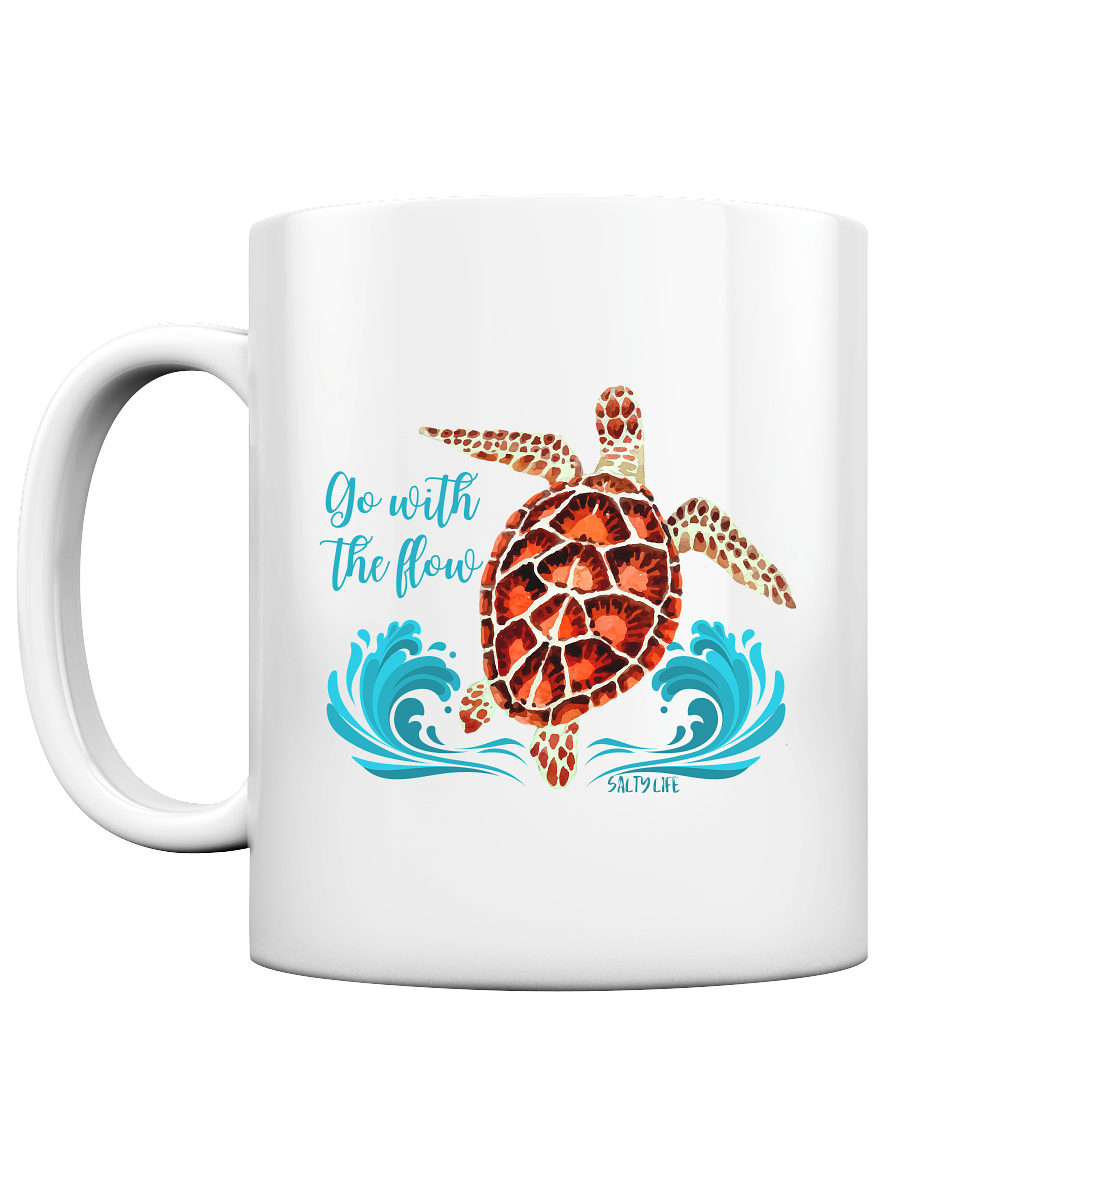 Turtle - Go with the flow  - Tasse glossy